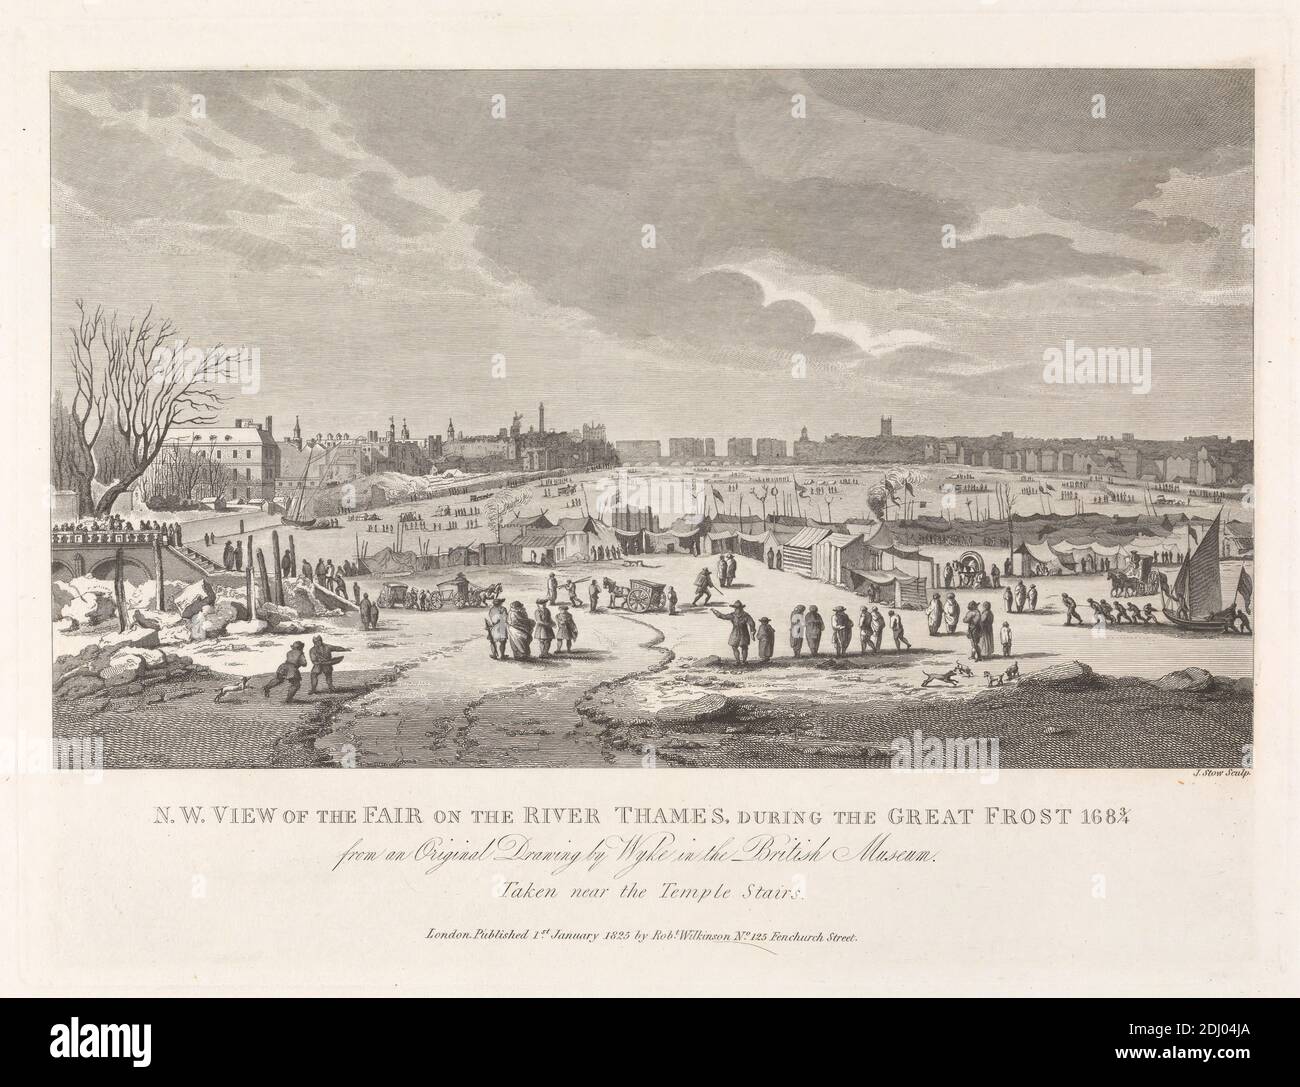 North West View of the Fair on the River Thames, during the Great Frost 1683/4, James Stour, active 1825, after Jan Wyck, ca. 1645–1700, Dutch, active in Britain (from ca. 1664), 1825, Engraving Stock Photo